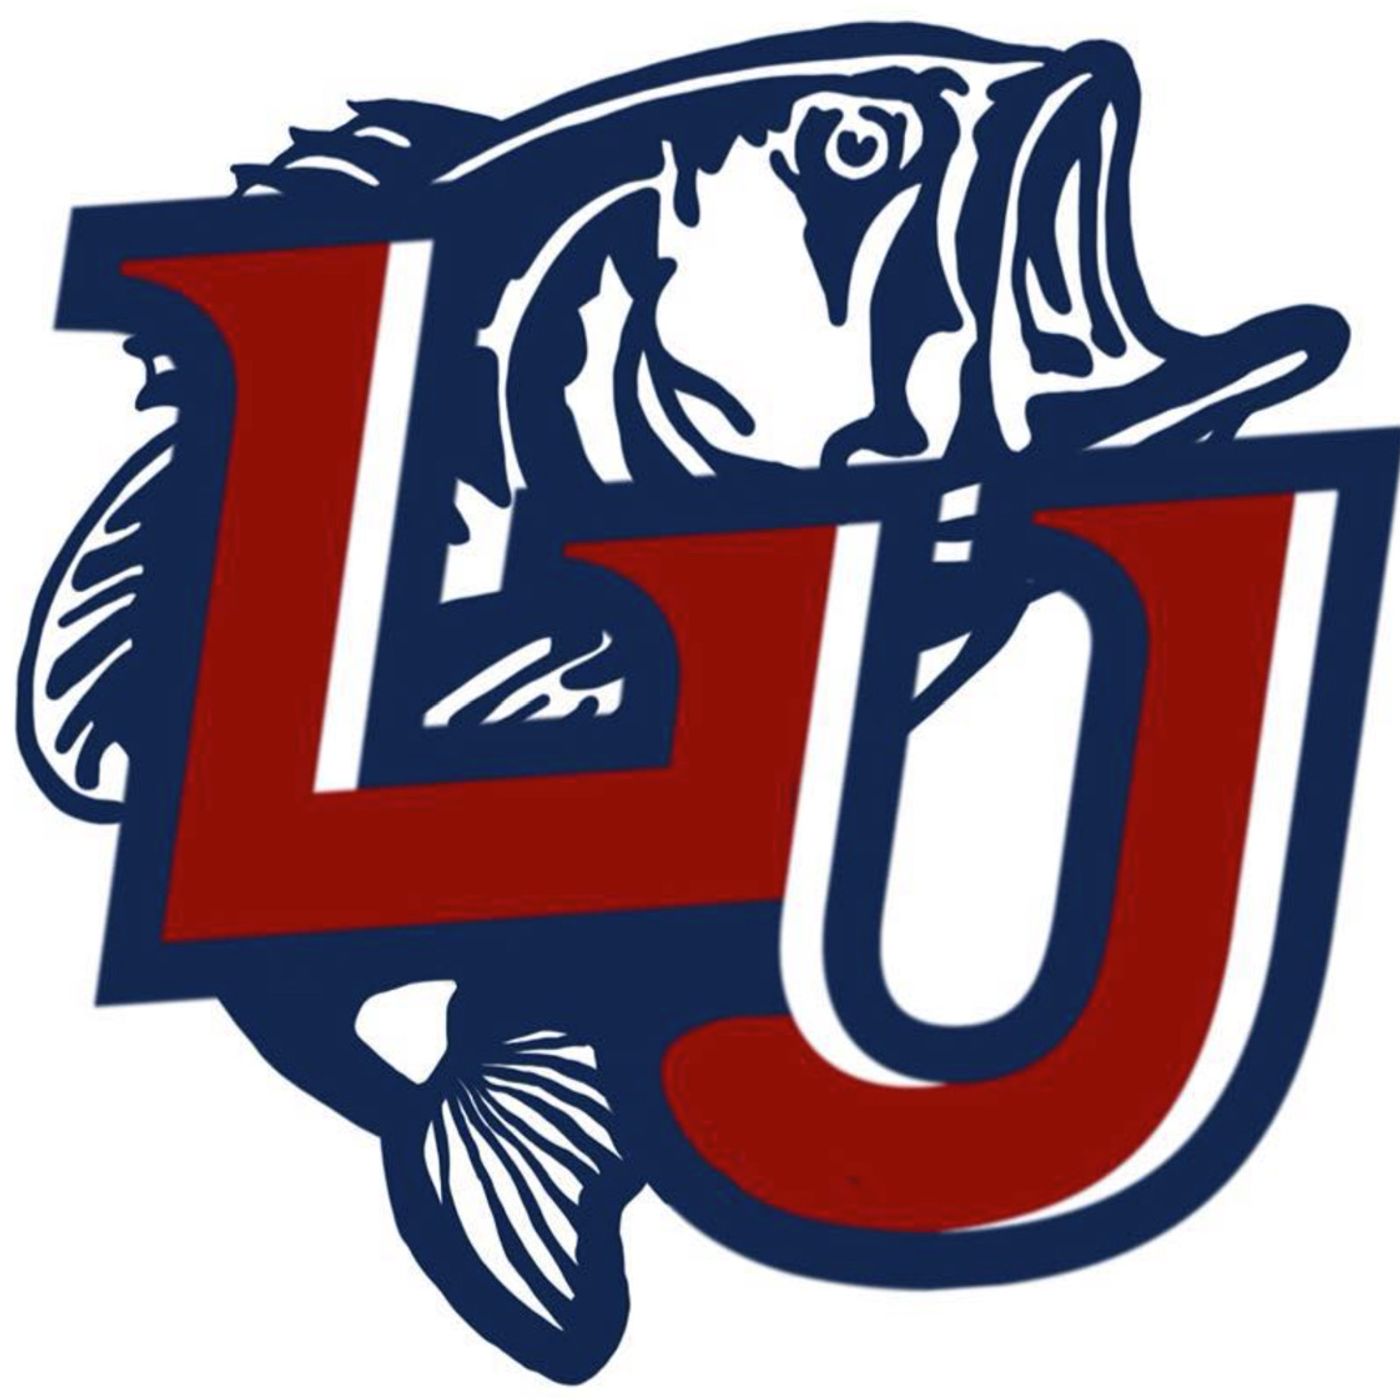 More than just a College Bass Fishing Club: Liberty University